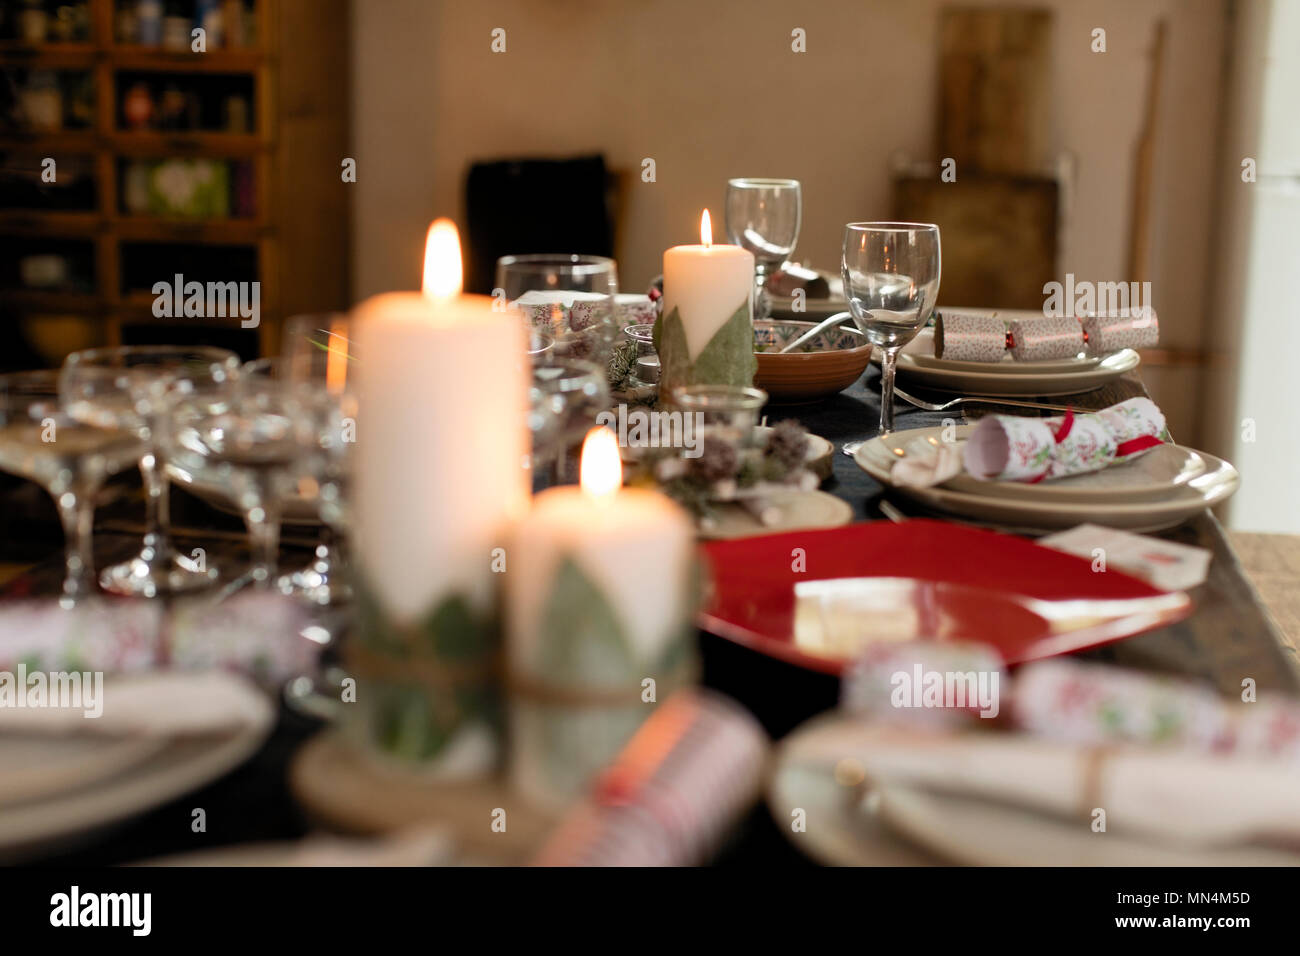 Candles, placesettings and Christmas crackers on table Stock Photo